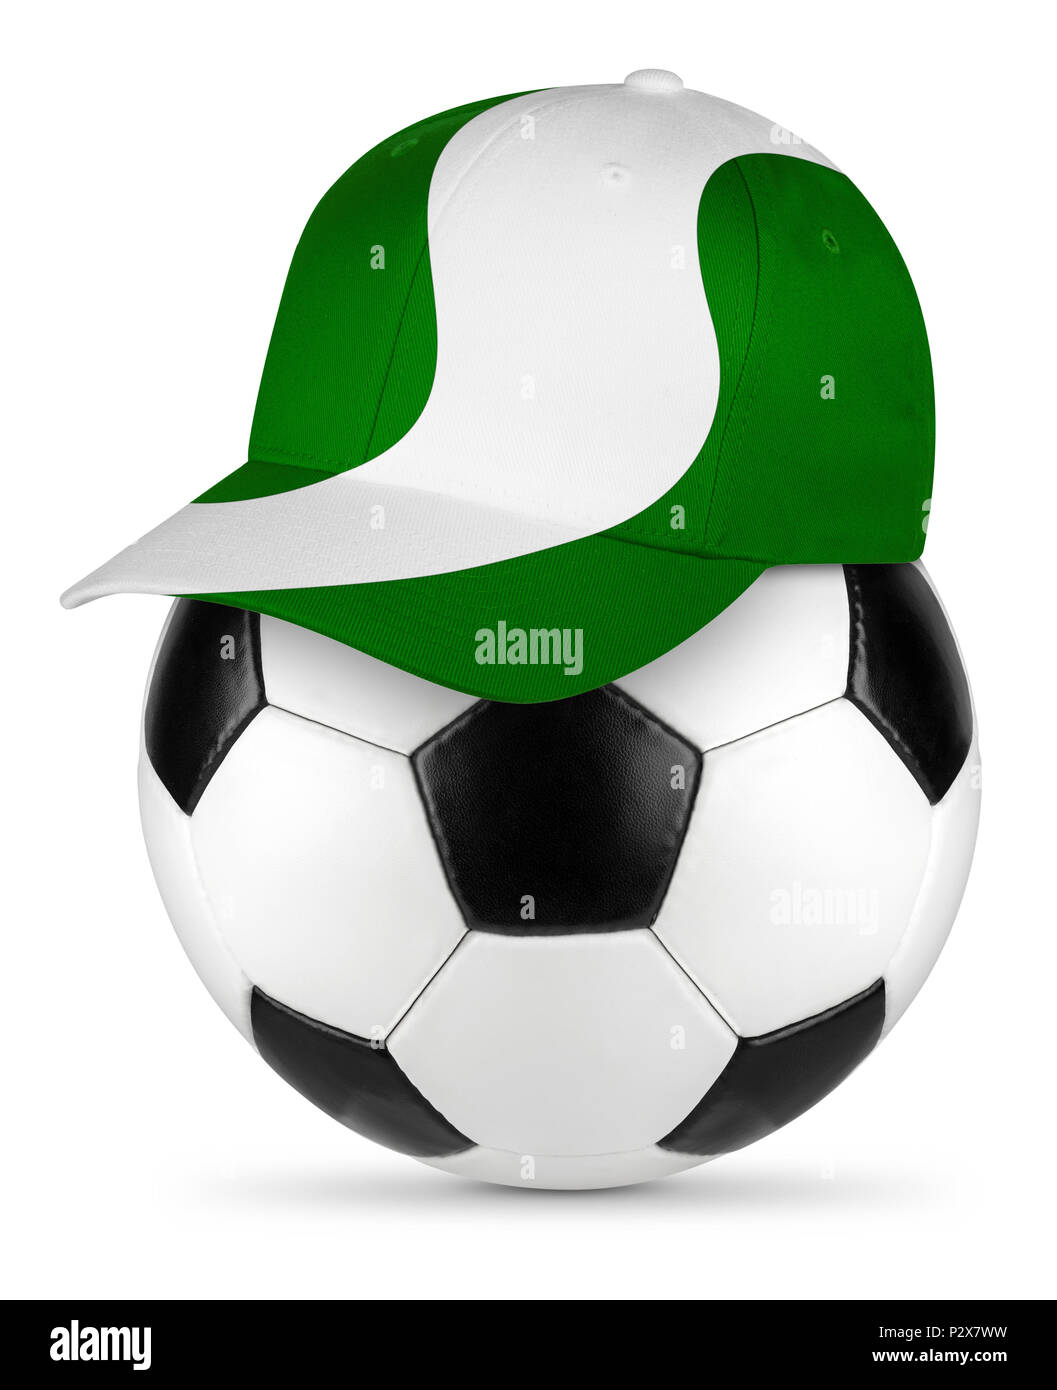 Classic black white leather soccer ball with nigeria nigerian flag baseball fan cap isolated background sport football concept Stock Photo